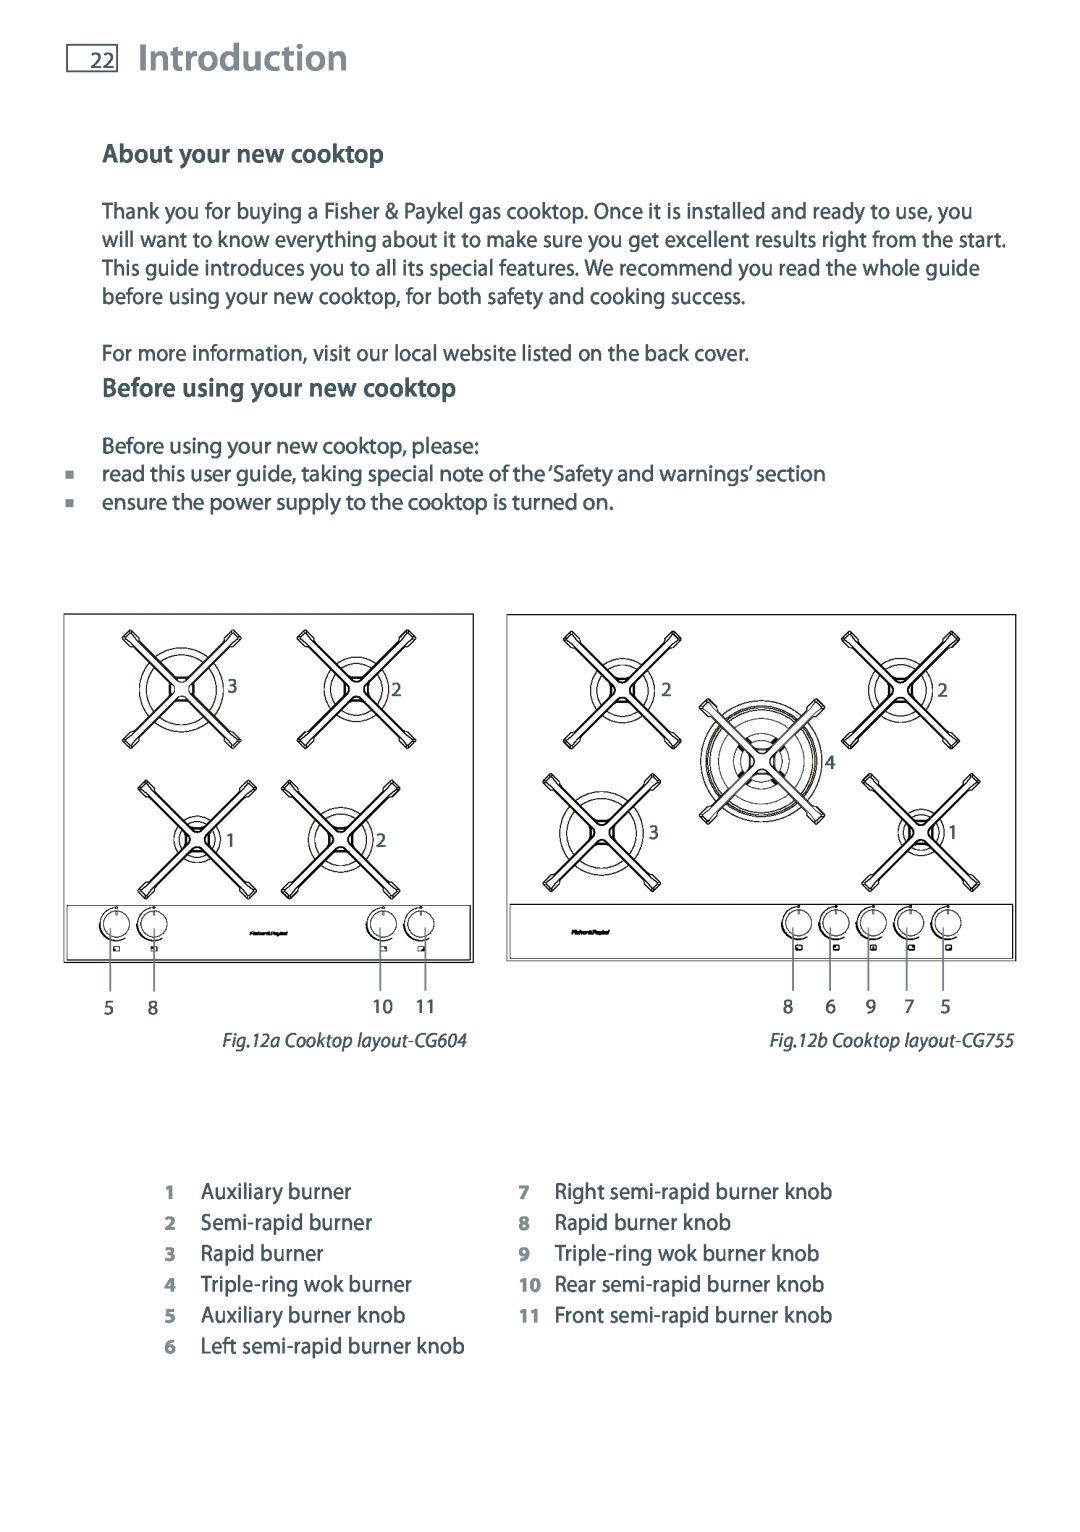 Fisher & Paykel CG755 installation instructions Introduction, About your new cooktop, Before using your new cooktop 